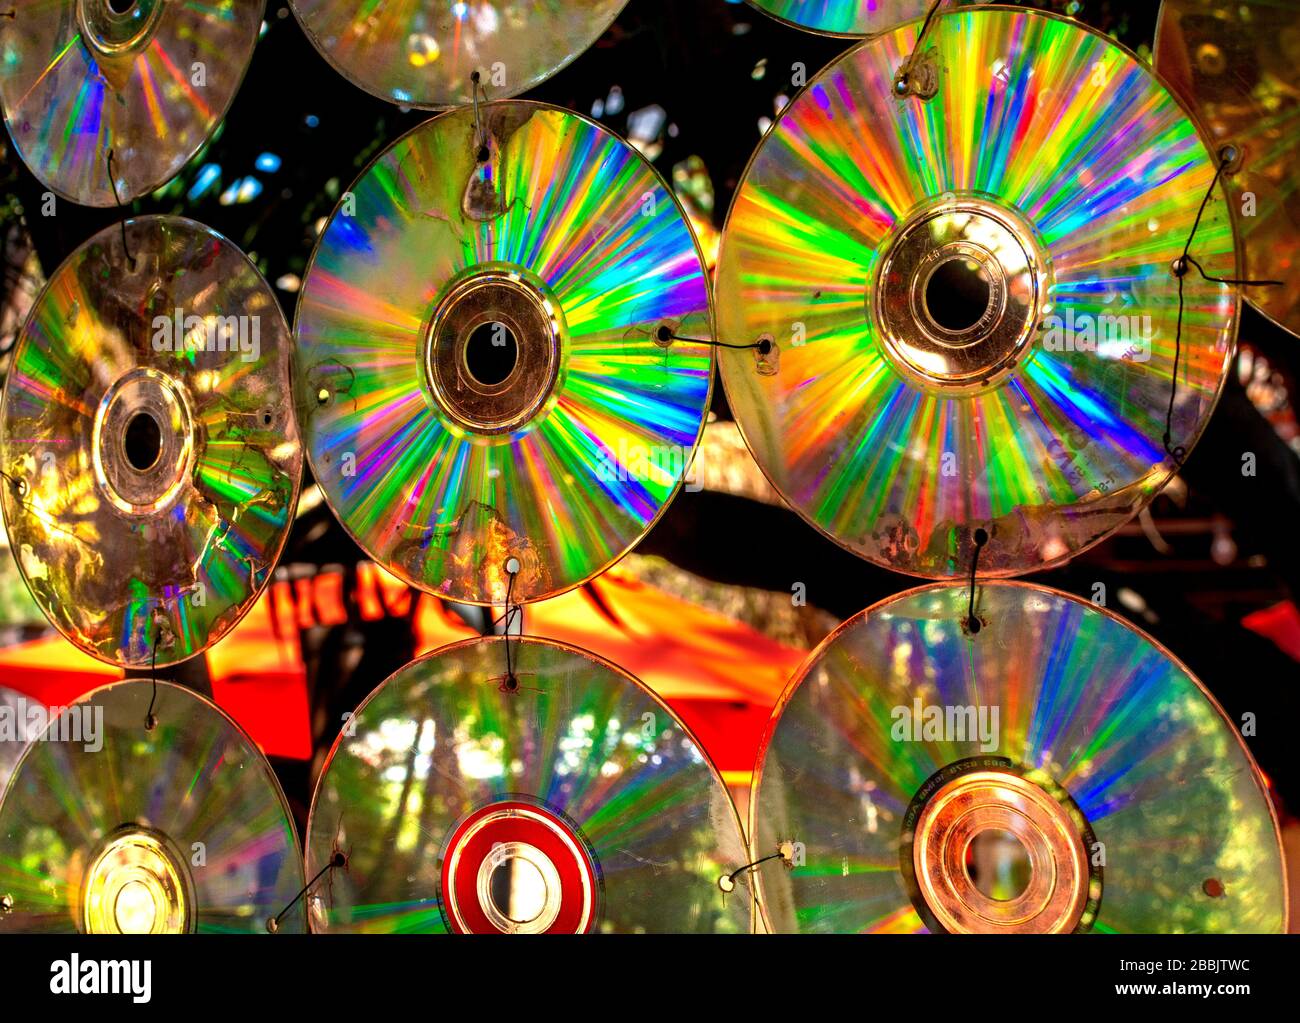 Hanging Mobile of old CDs outside create vivid rainbows in the garden Stock  Photo - Alamy